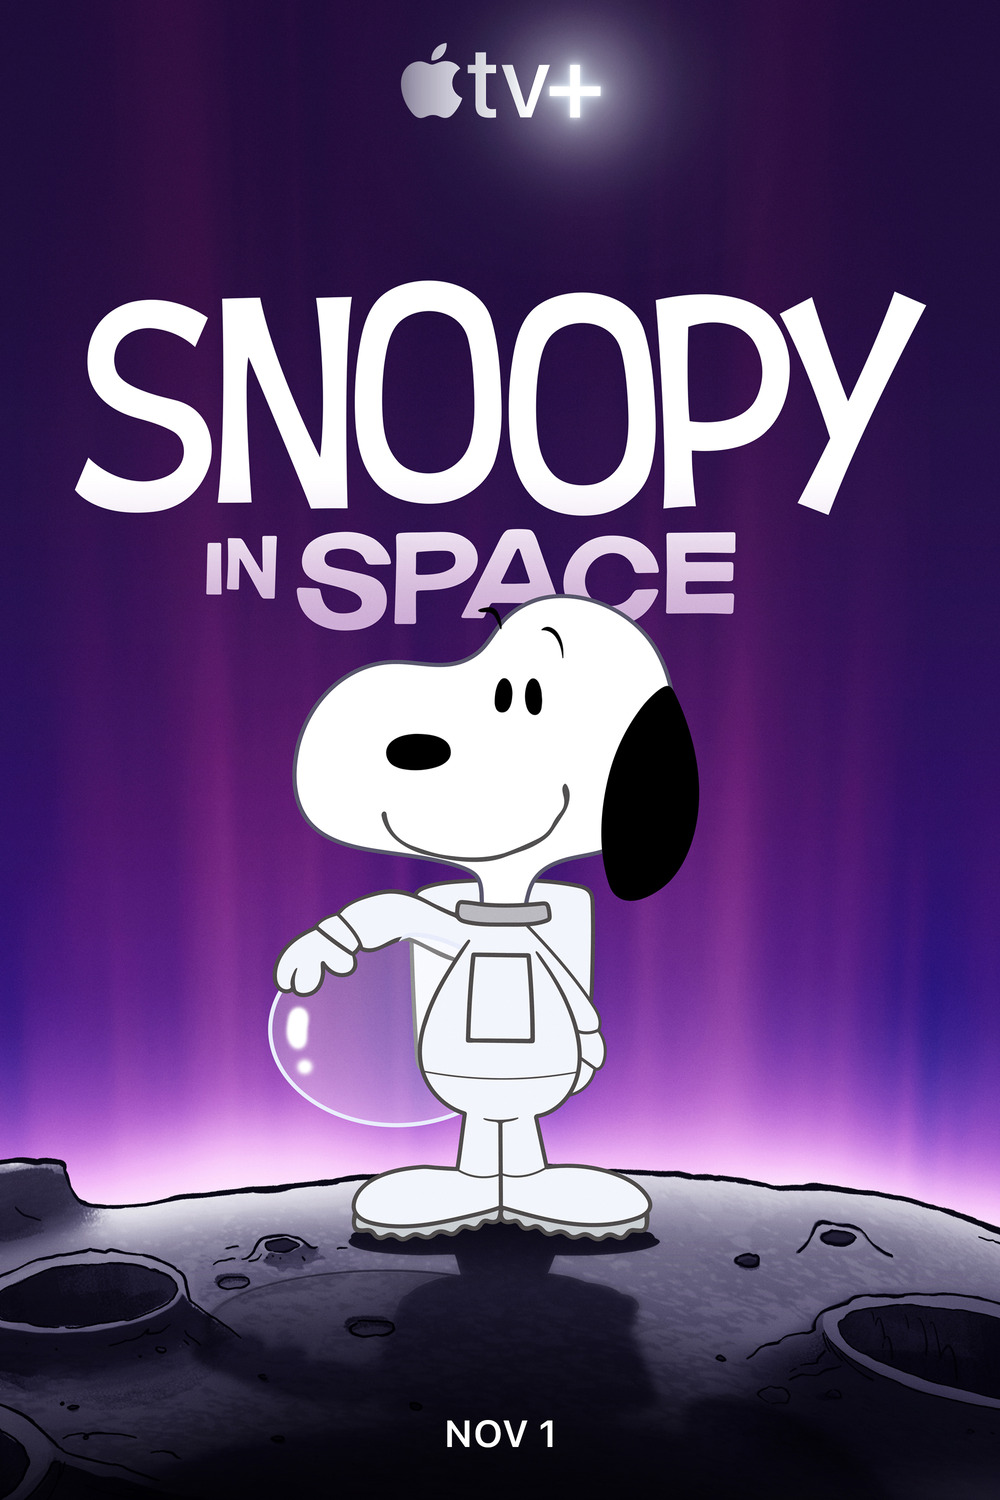 Snoopy in space Snoopy11